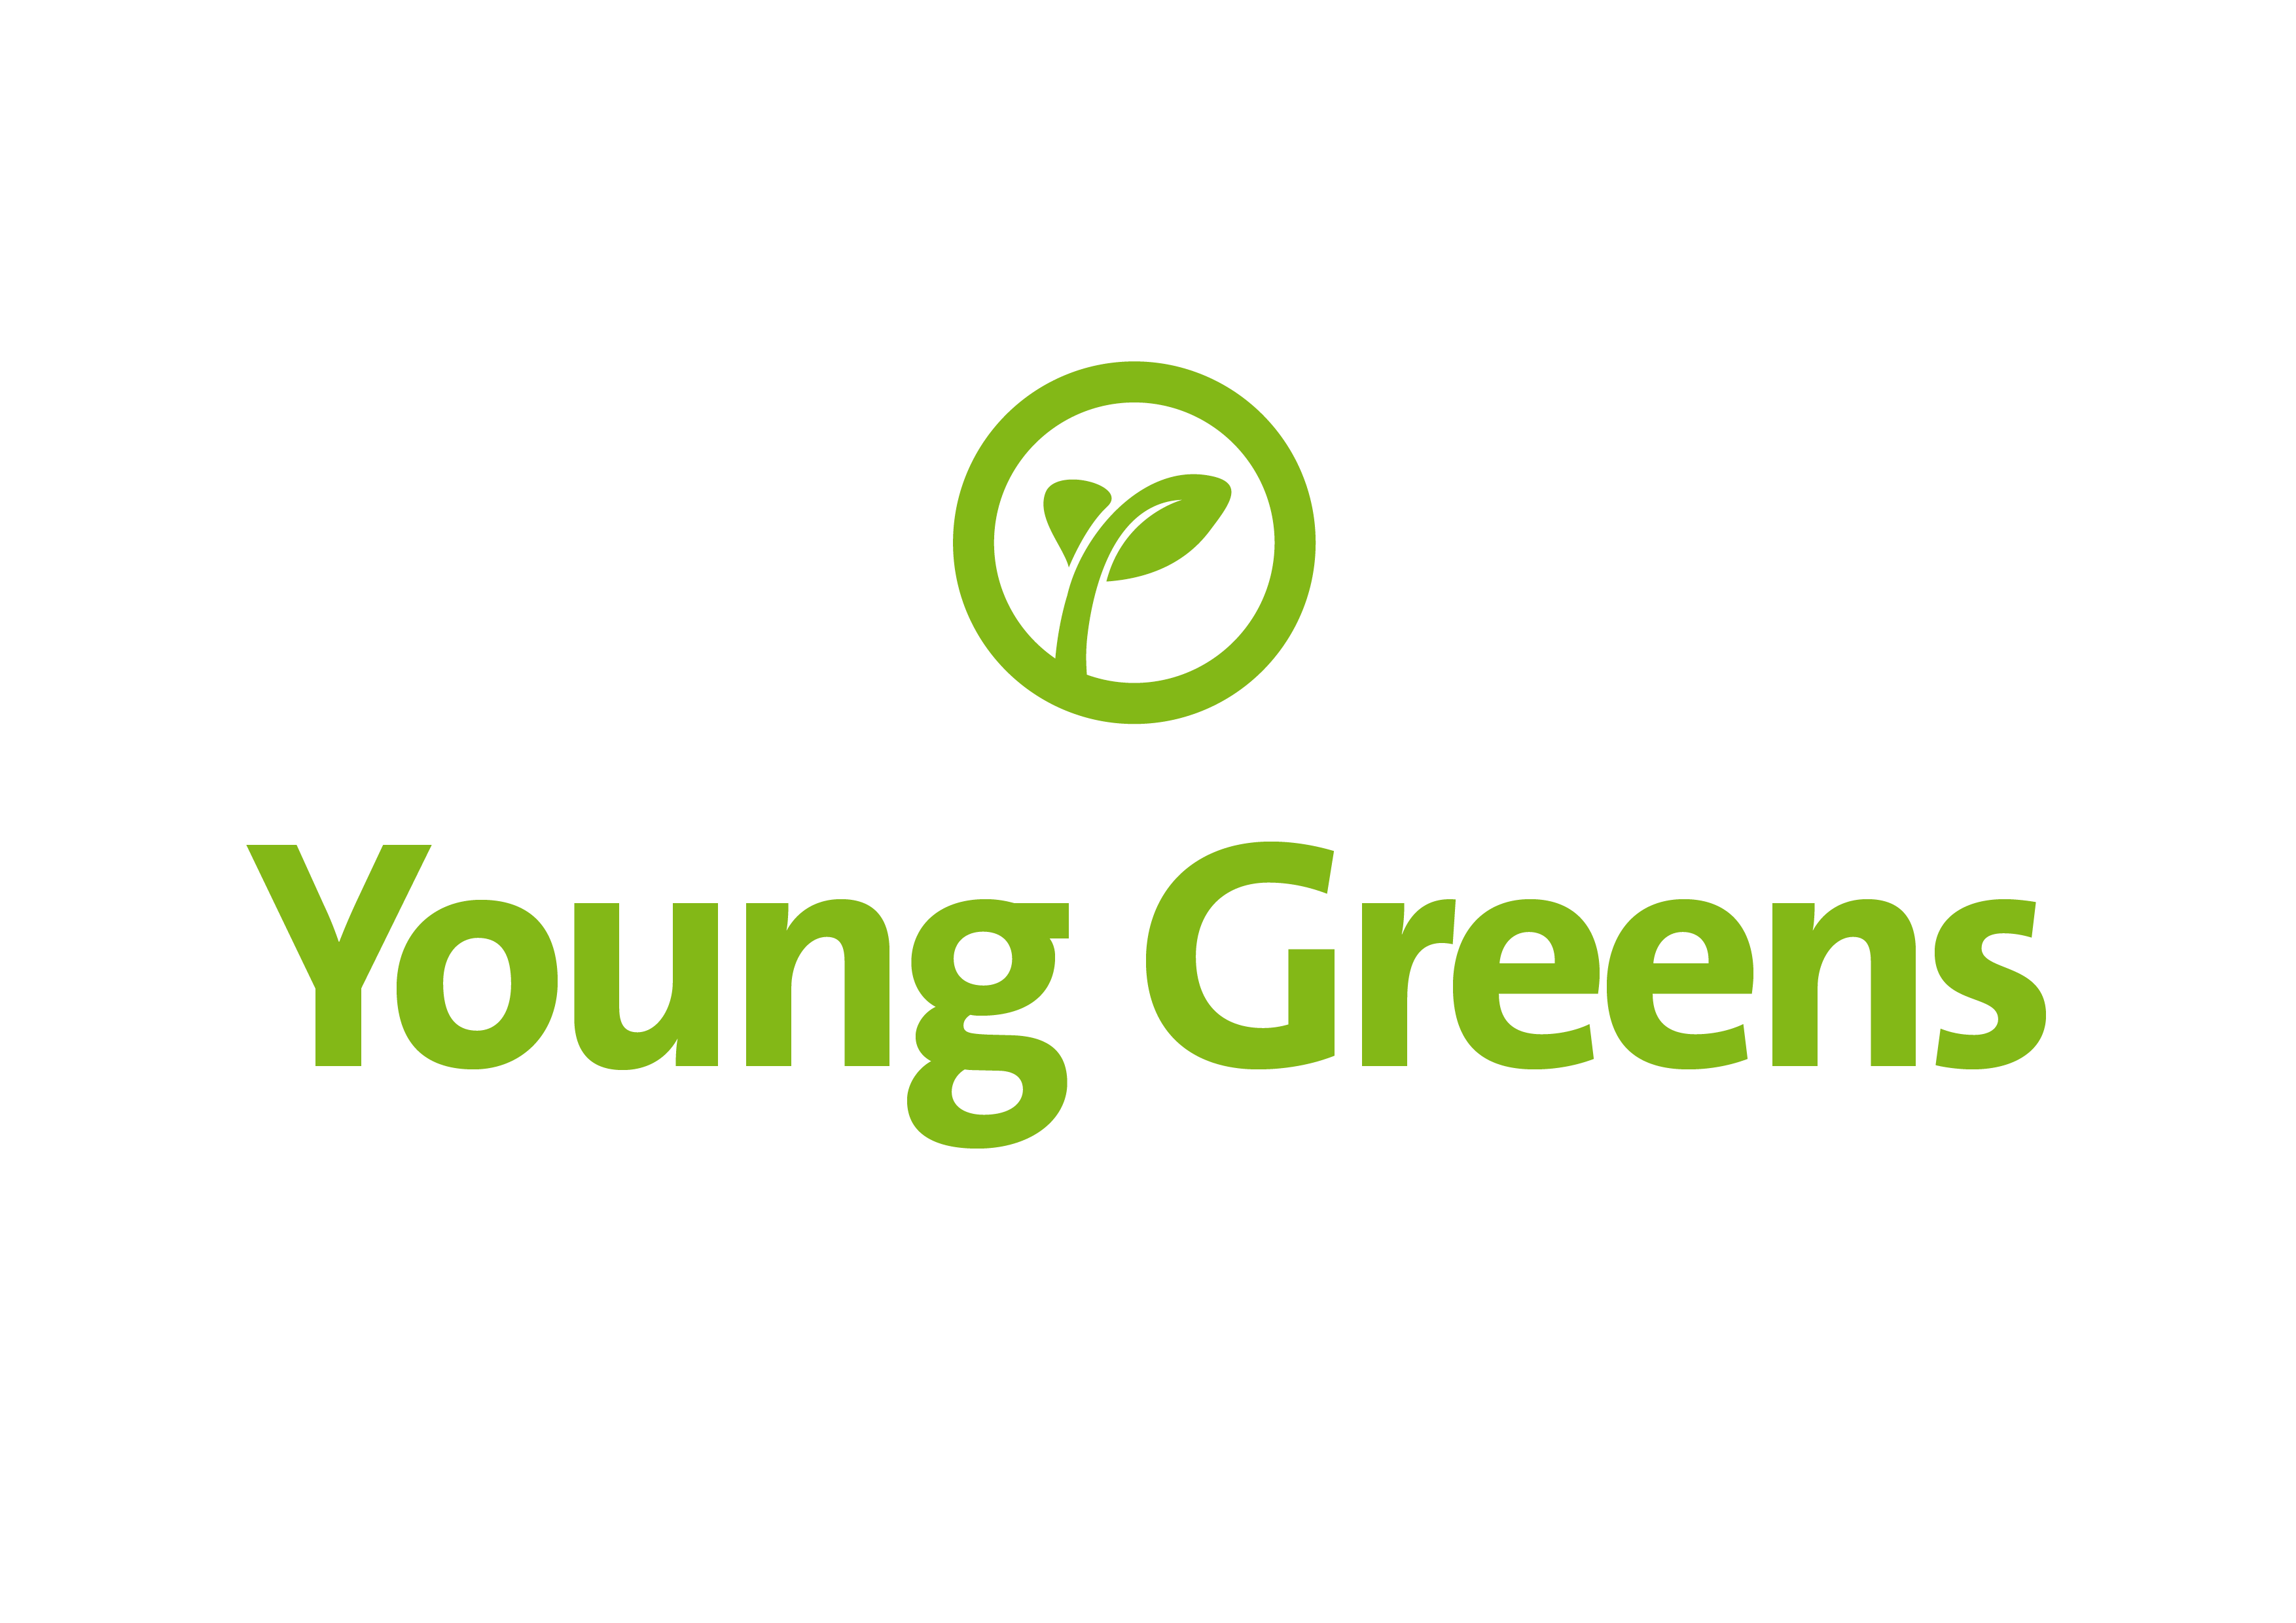 With Green Circle Brand Logo - Logos and Branding - Young Greens